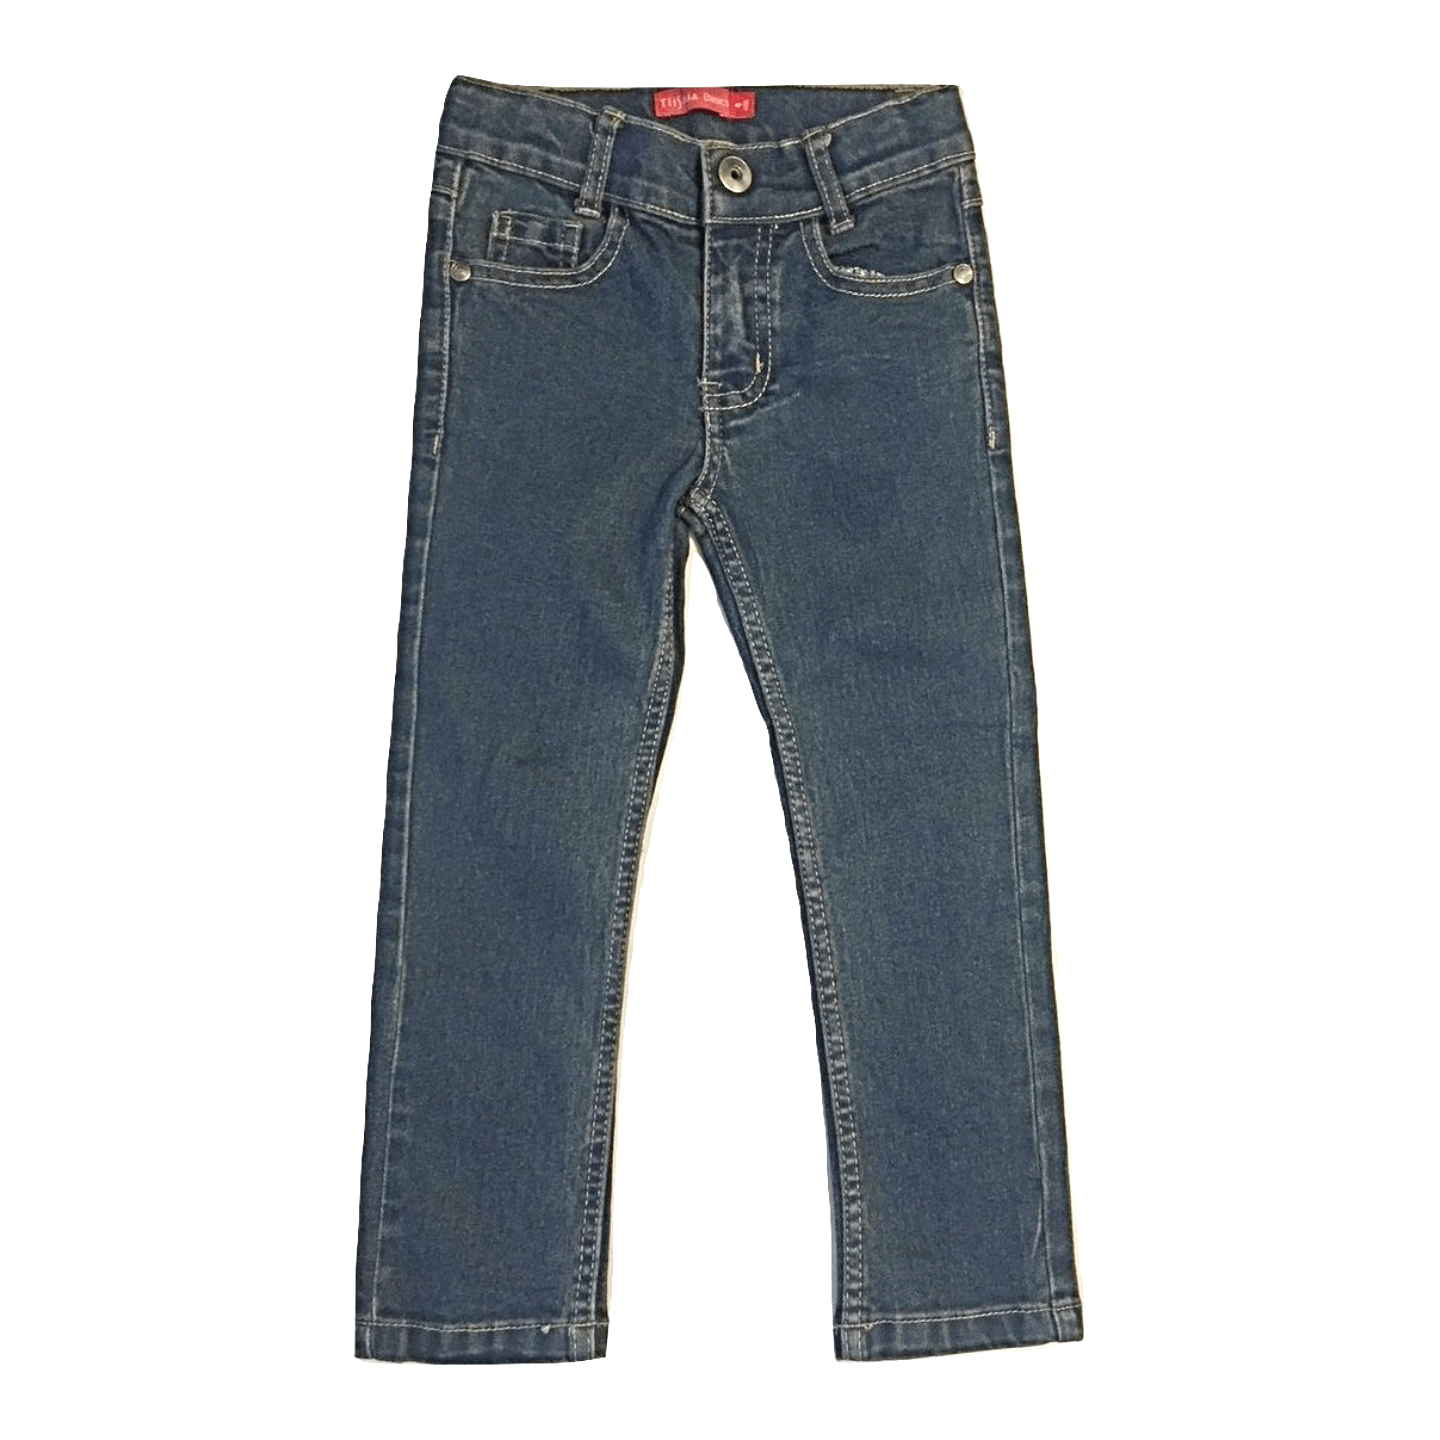 Tissaia Basic Blue Boys Jeans - Stockpoint Apparel Outlet